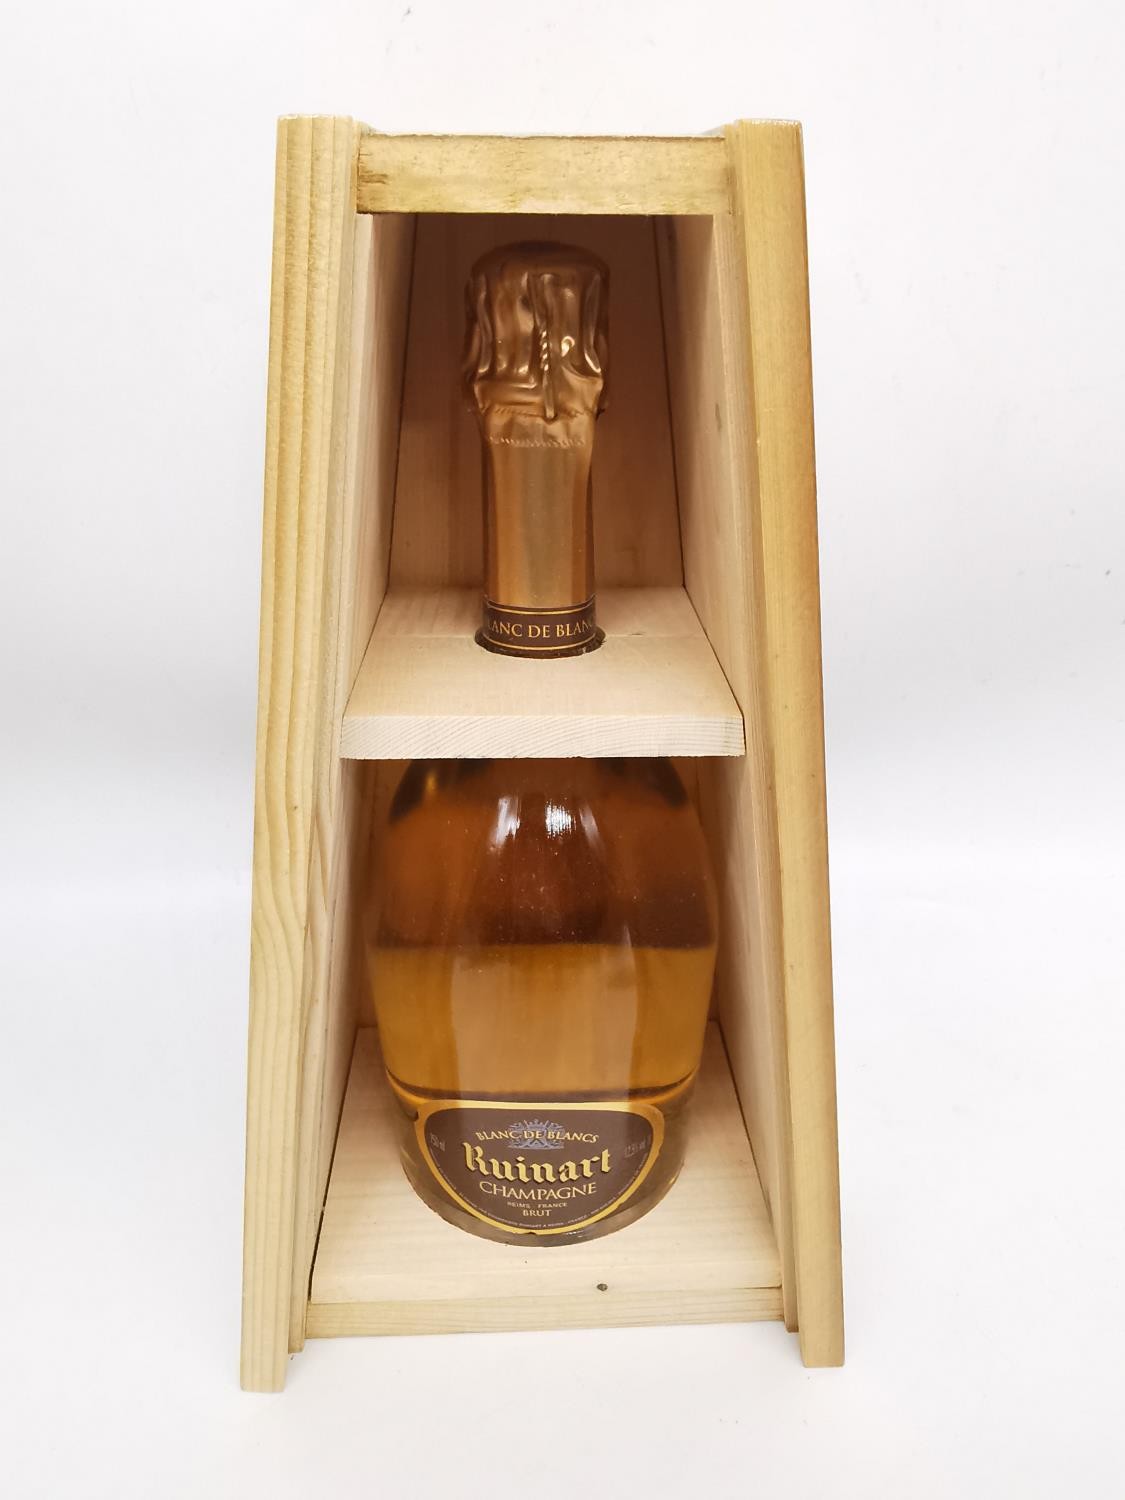 A limited edition 2013 Ruinart Champagne Brut bottle in reclaimed wood case designed by Piet Hein - Image 2 of 7